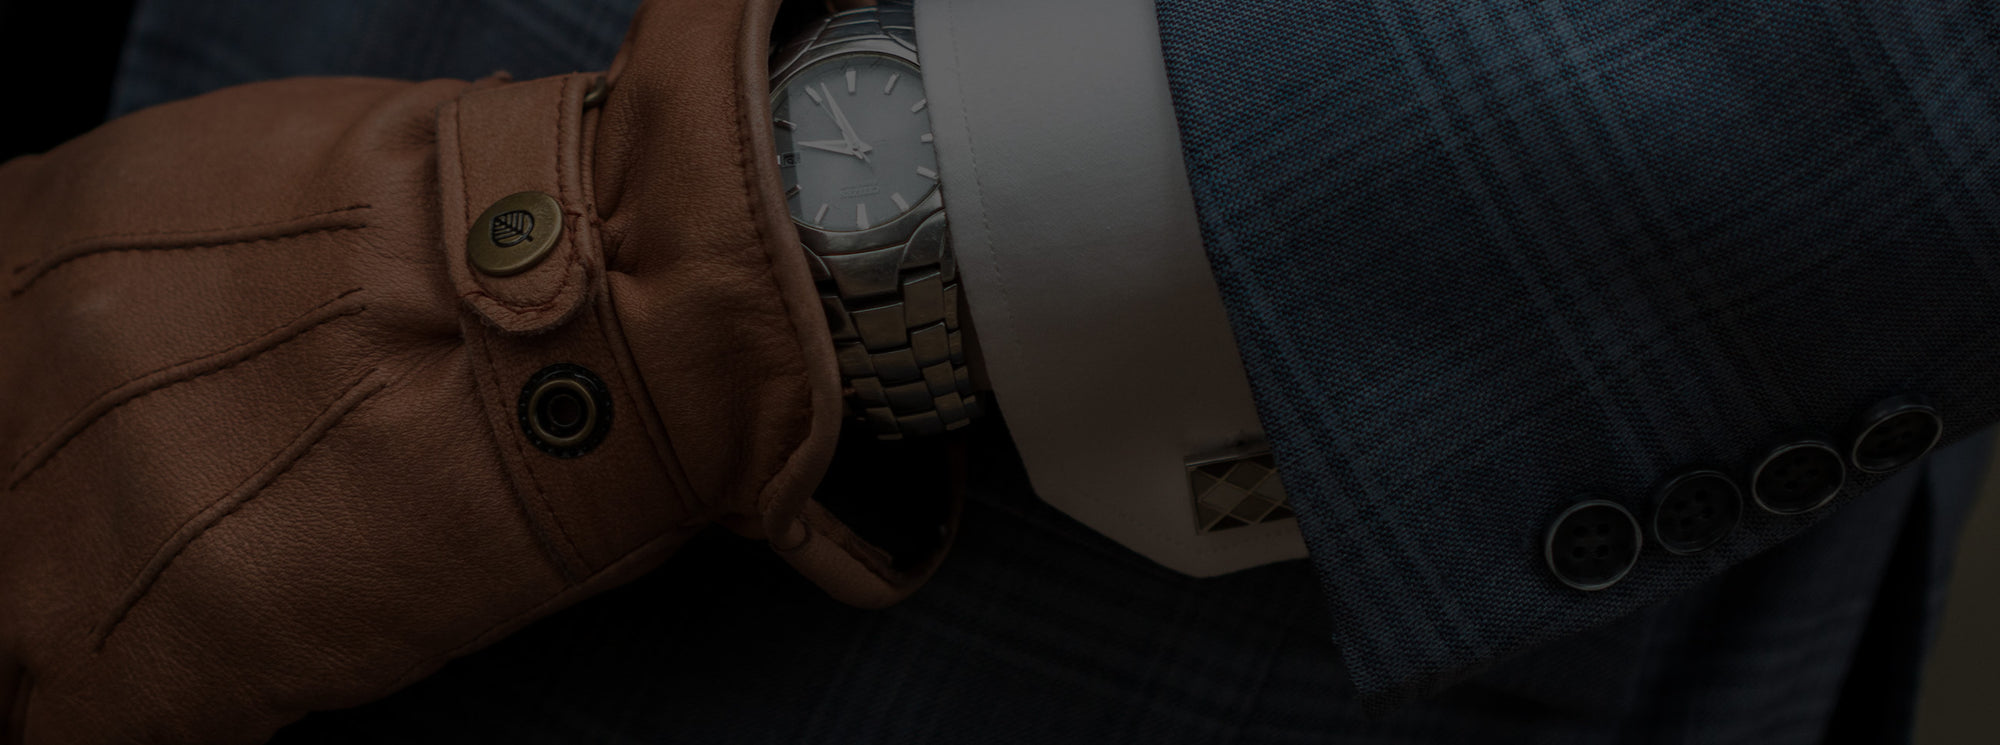 Cufflink on a shirt sleeve with a suit and brown golves